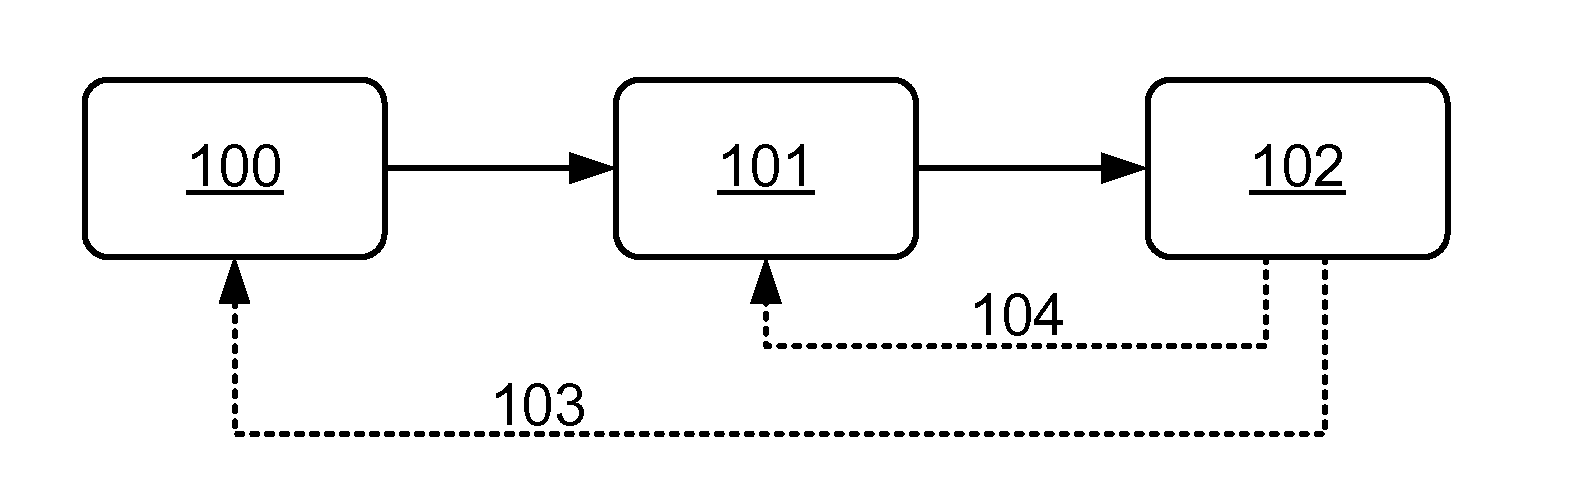 Method and system for human-to-computer gesture based simultaneous interactions using singular points of interest on a hand